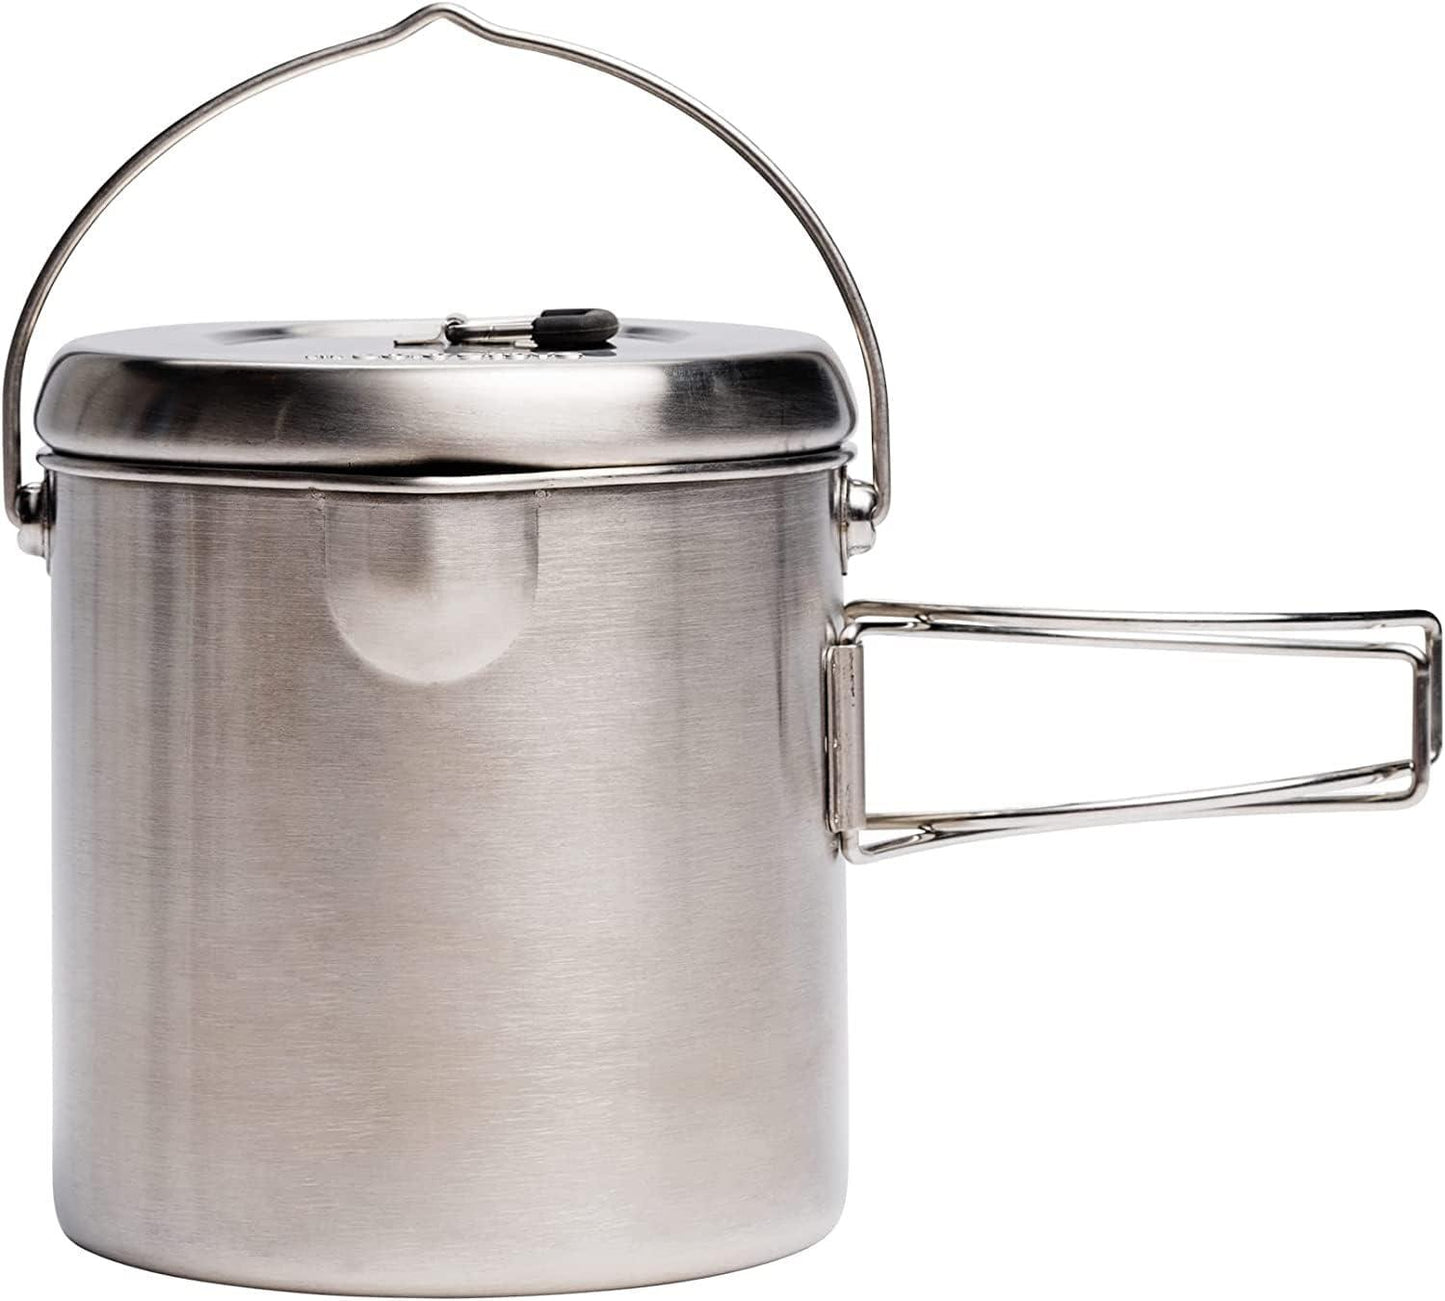 Solo Stove Pot 900/1800/4000 Stainless Steel Companion Pots | Lightweight Aluminum Pot Holding Tripod | Great Portable Cookware for Backpacking, Camping & Survival Adventures | Deisgned for use with Lite/Titan/Campfire Solo Stoves